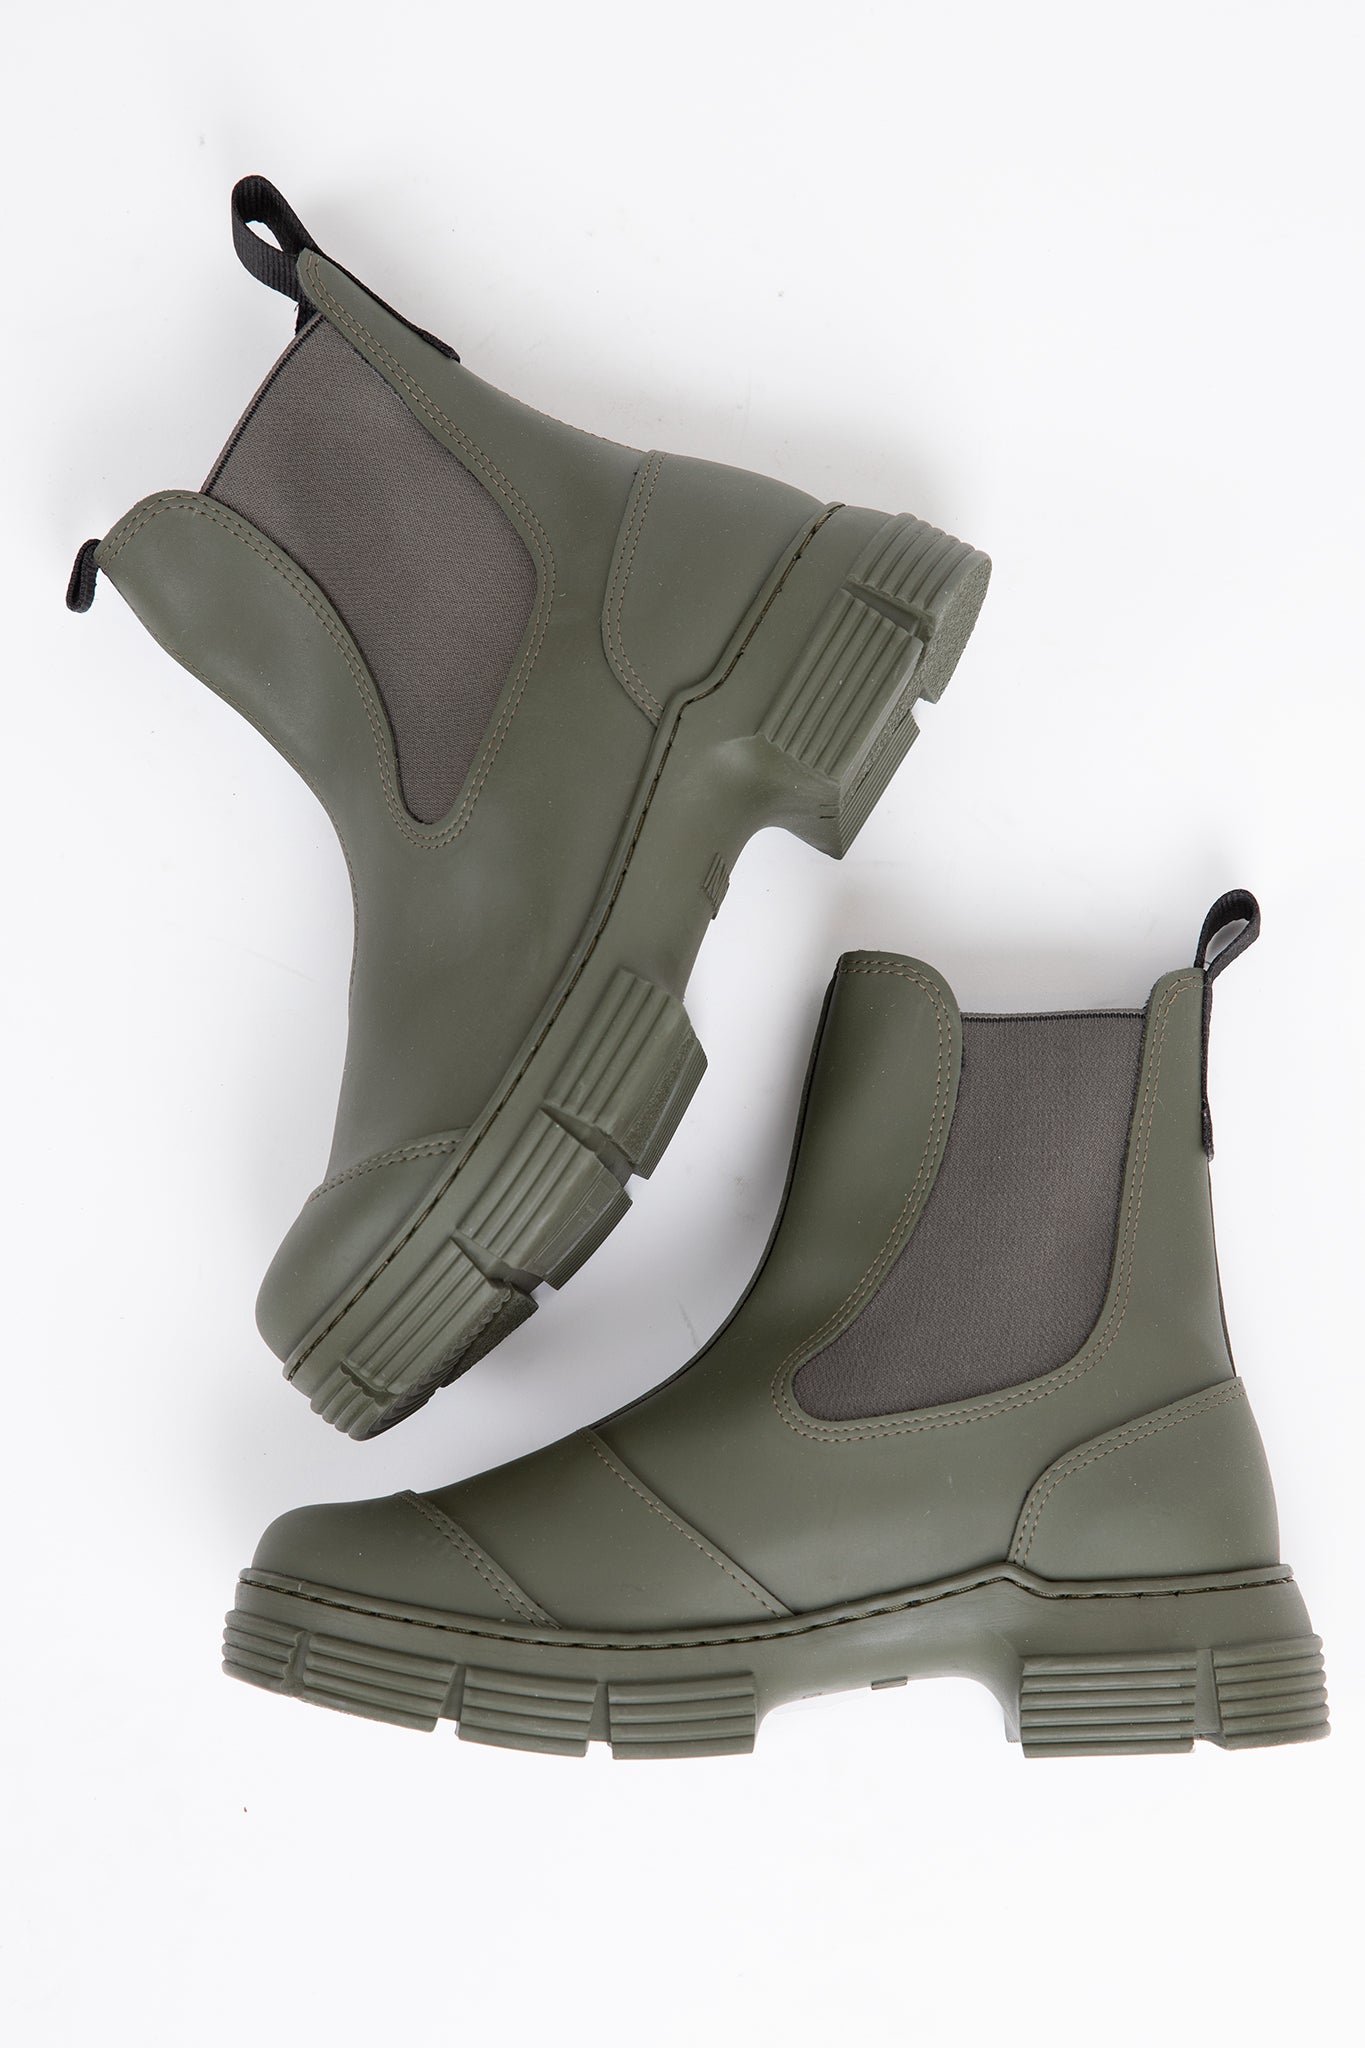 Recycled Rubber City Boot Footwear Ganni   